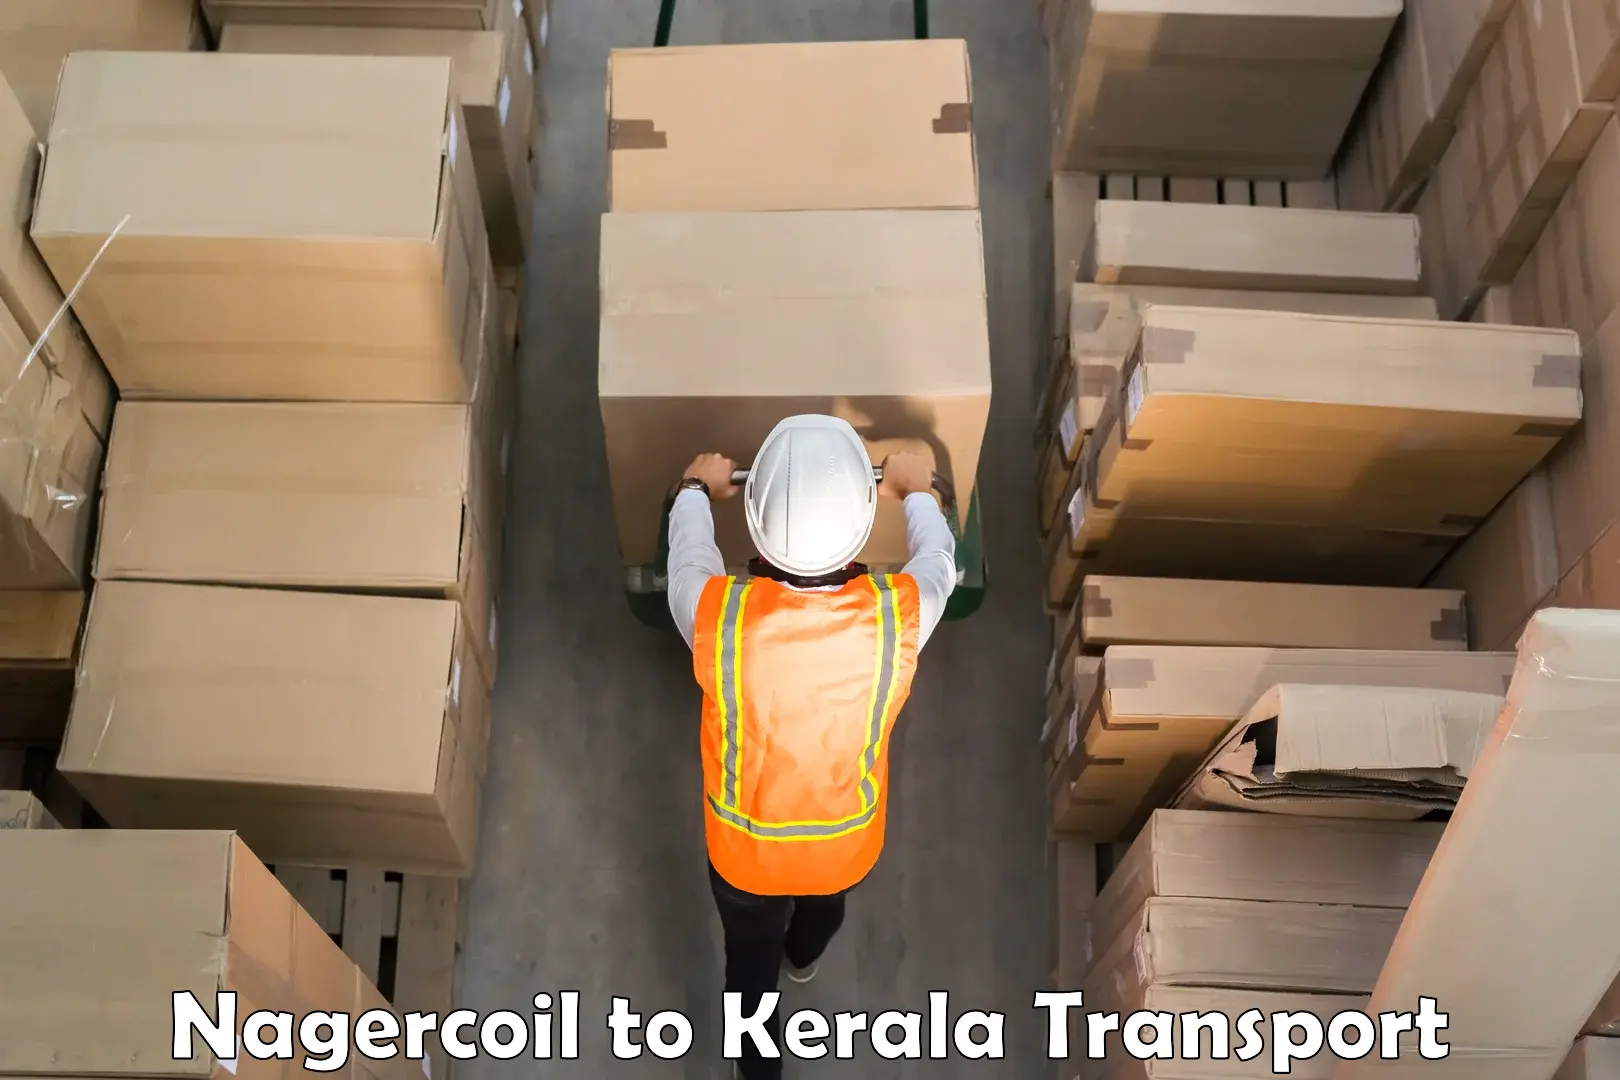 Truck transport companies in India Nagercoil to Kuchi